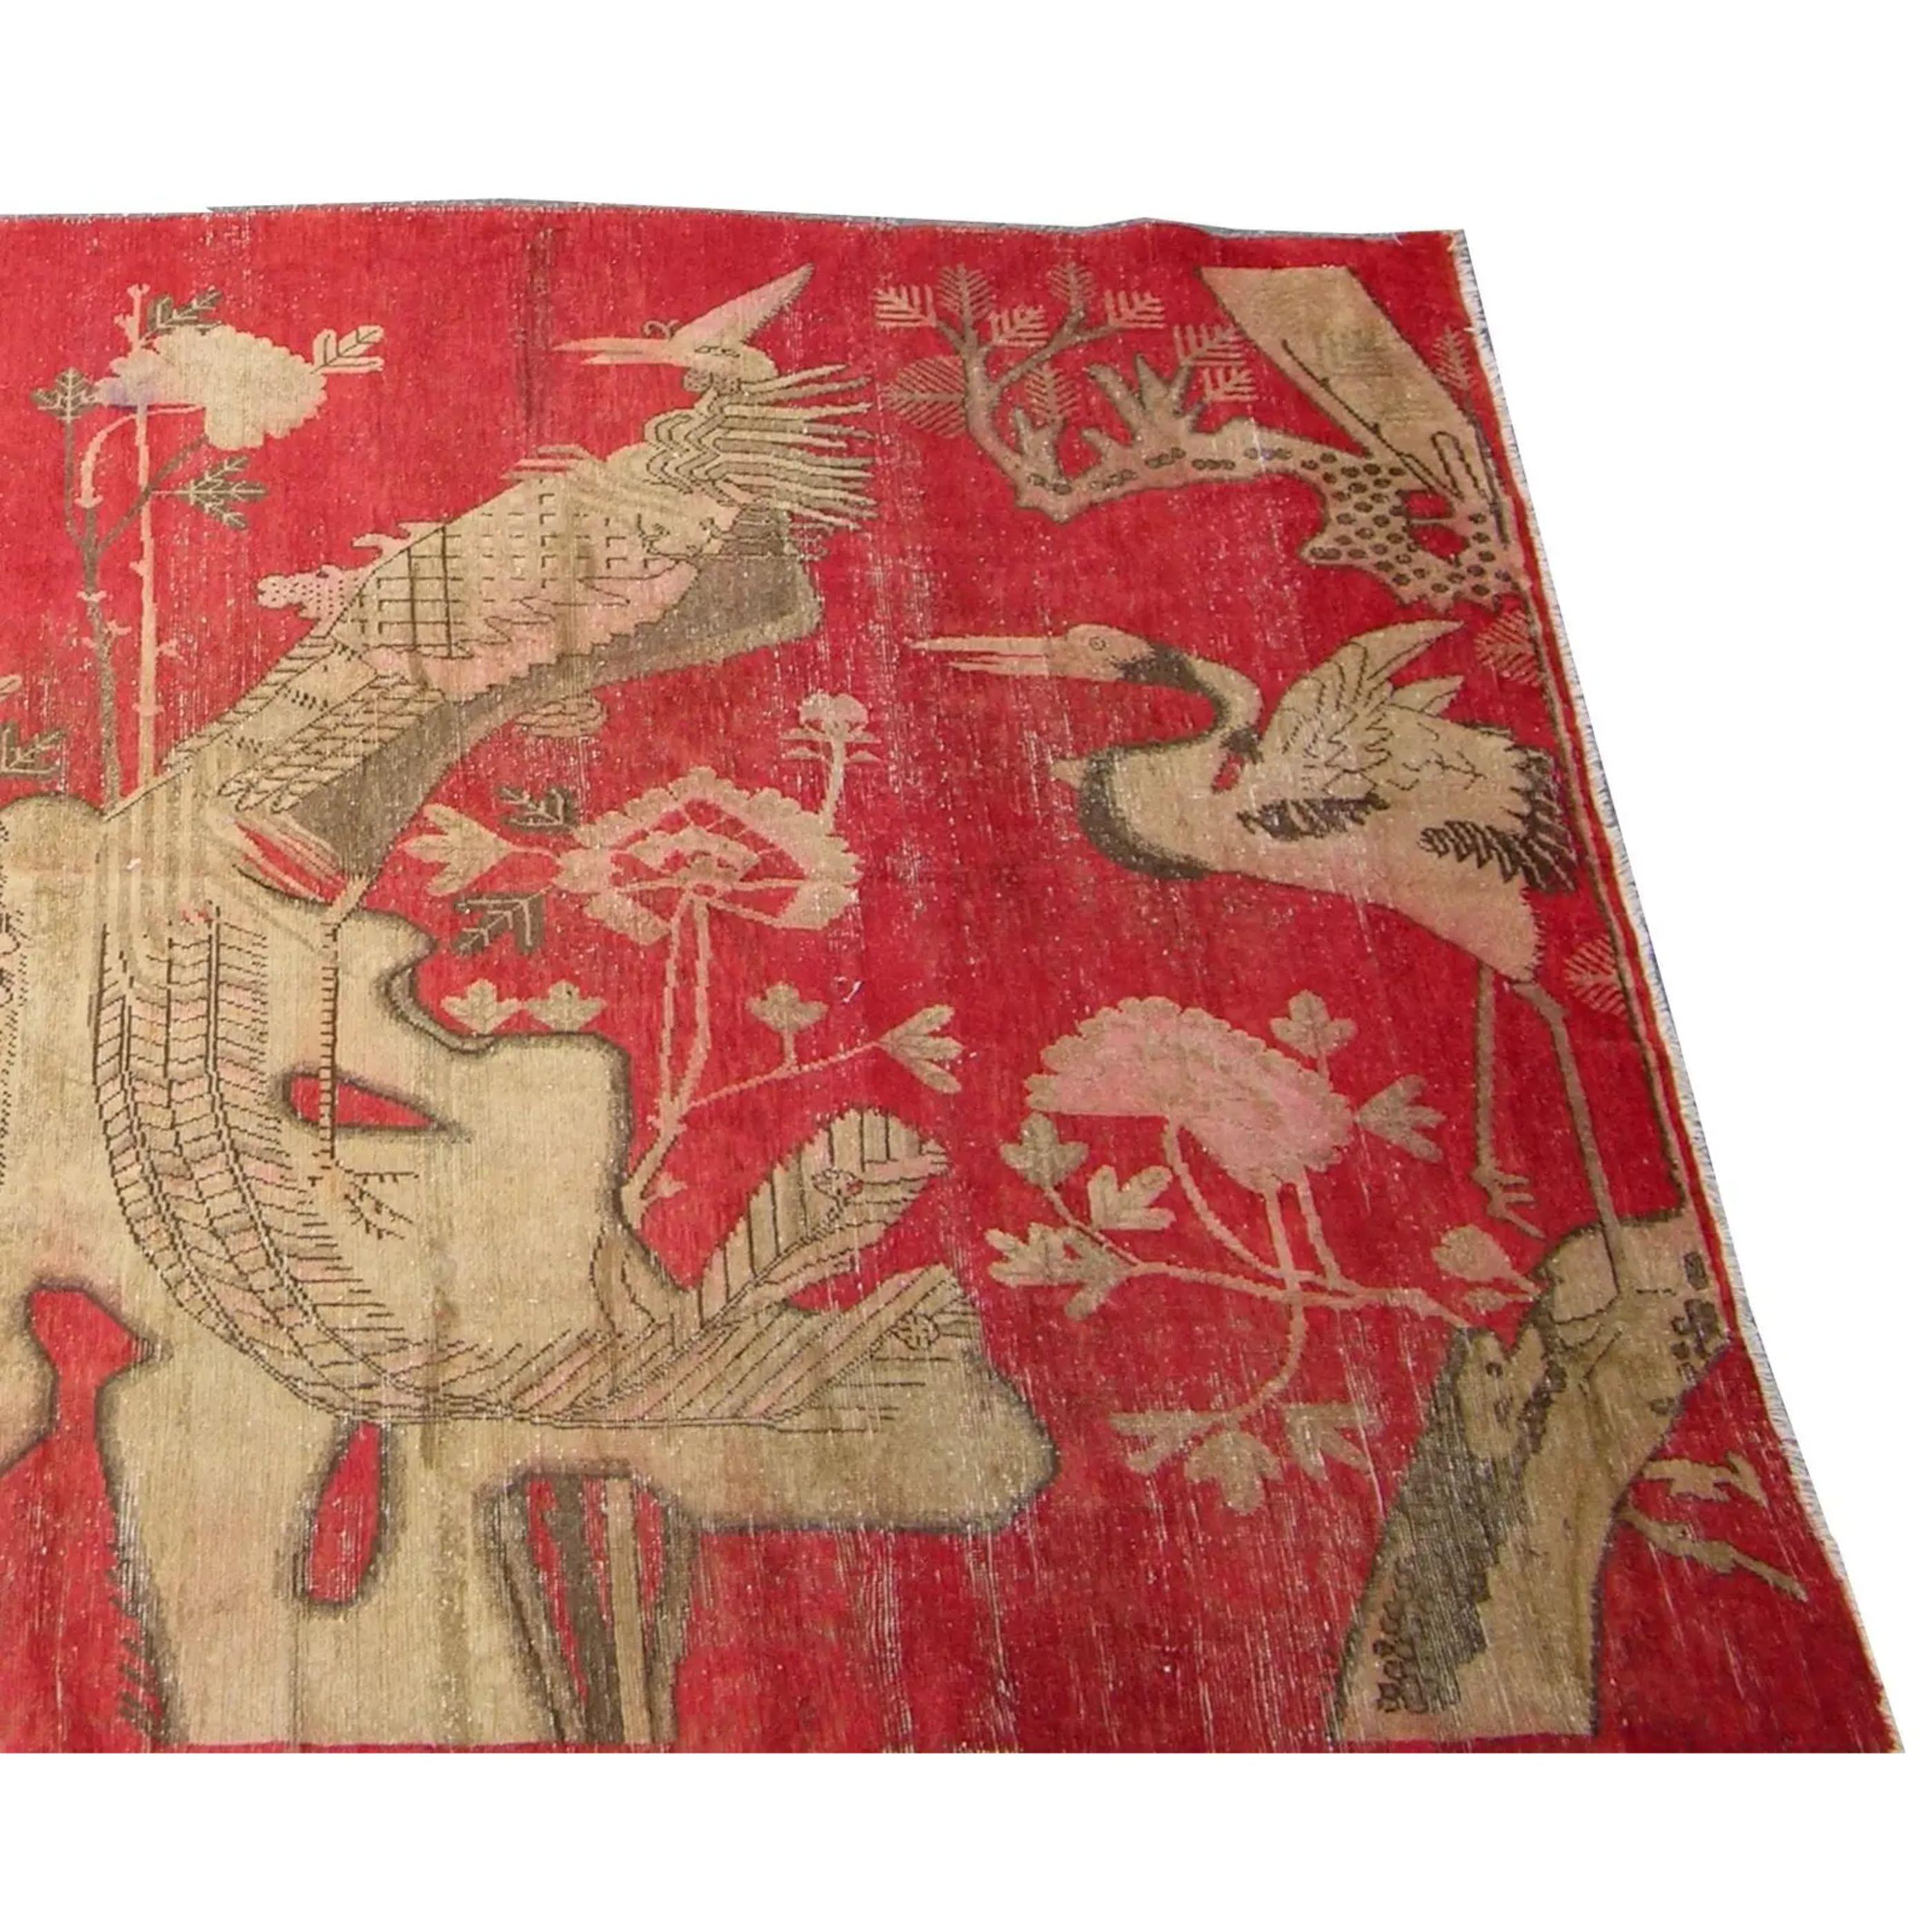 Up for sale is an antique Khotan Samarkand Rug with birds designs on a red background.